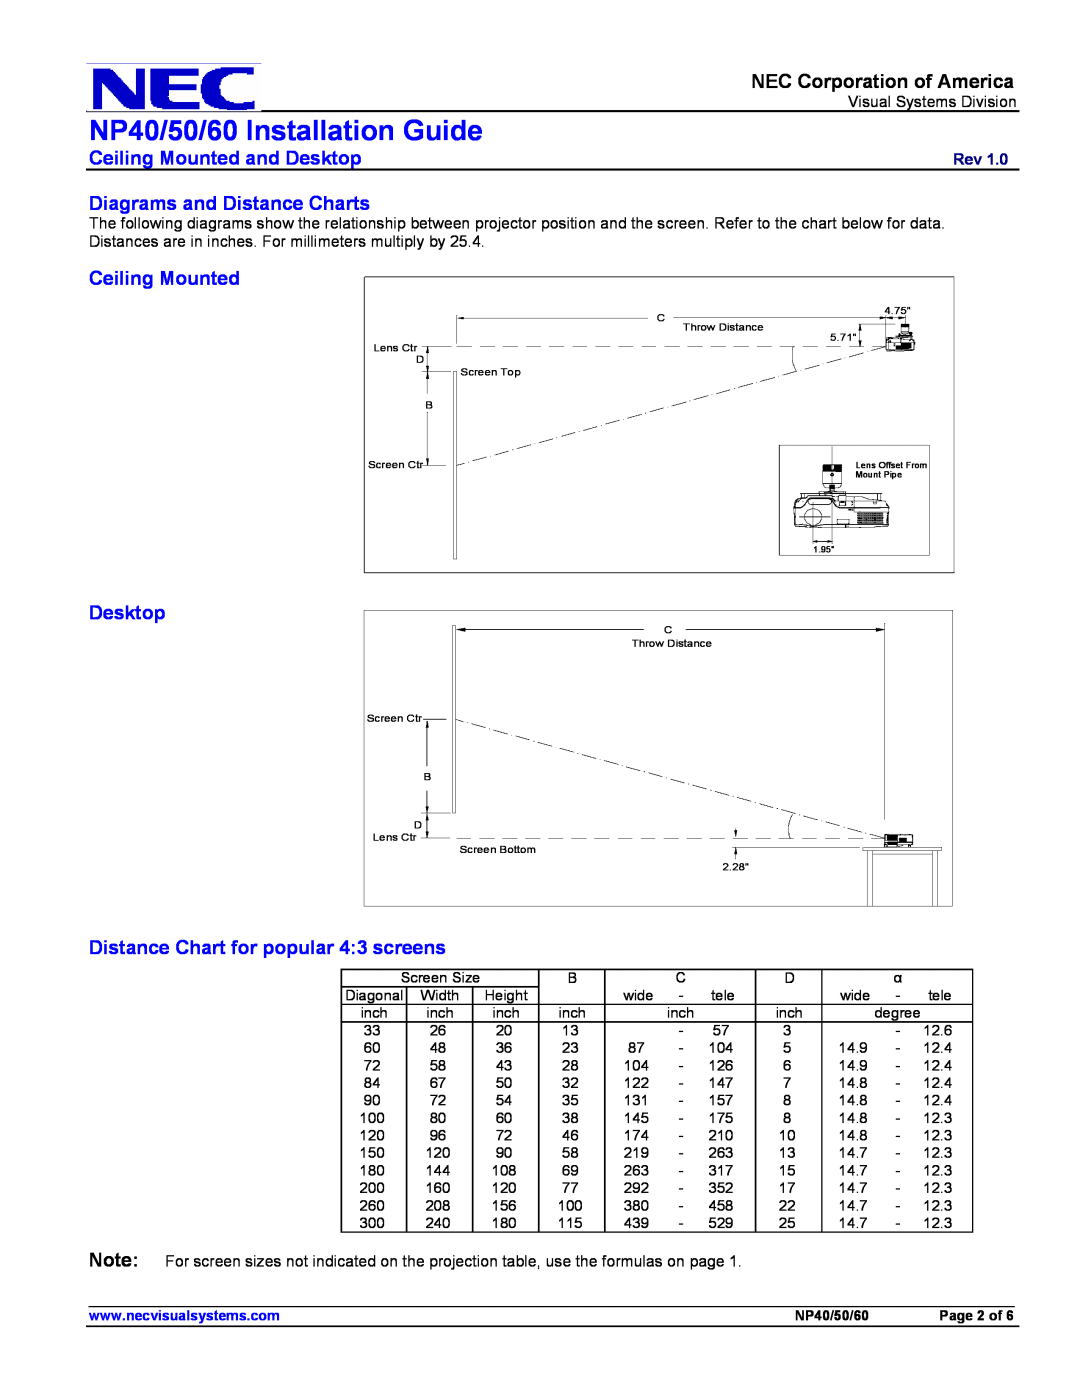 NEC NP40, NP60, NP50 Diagrams and Distance Charts, Ceiling Mounted Desktop, Distance Chart for popular 4 3 screens 